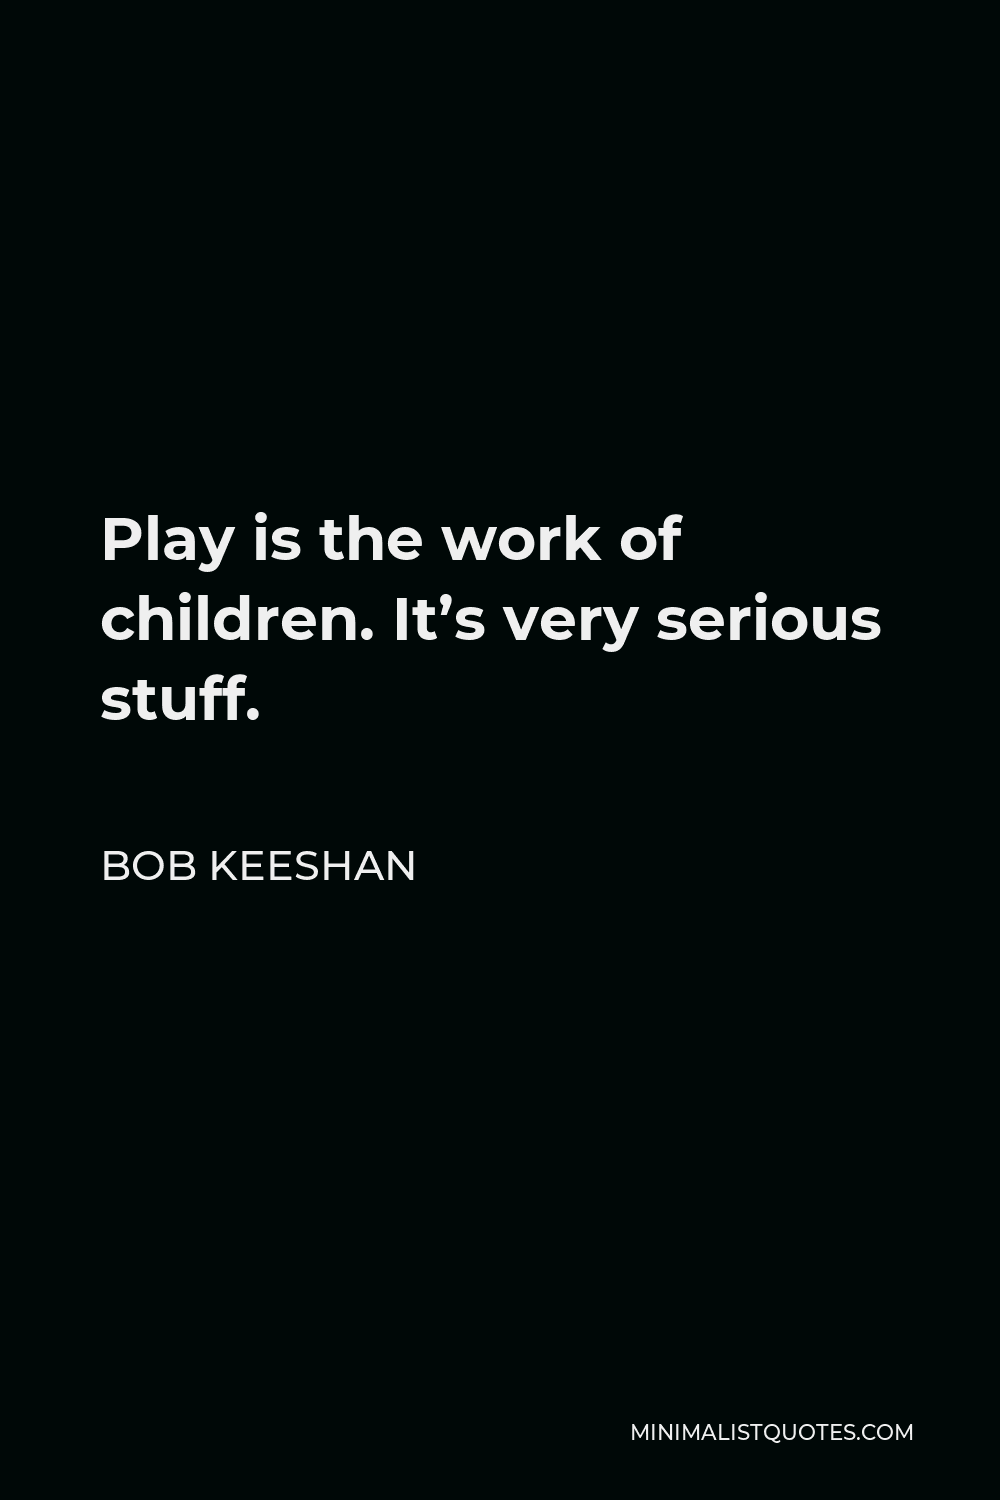 Bob Keeshan Quote - Play is the work of children. It’s very serious stuff.